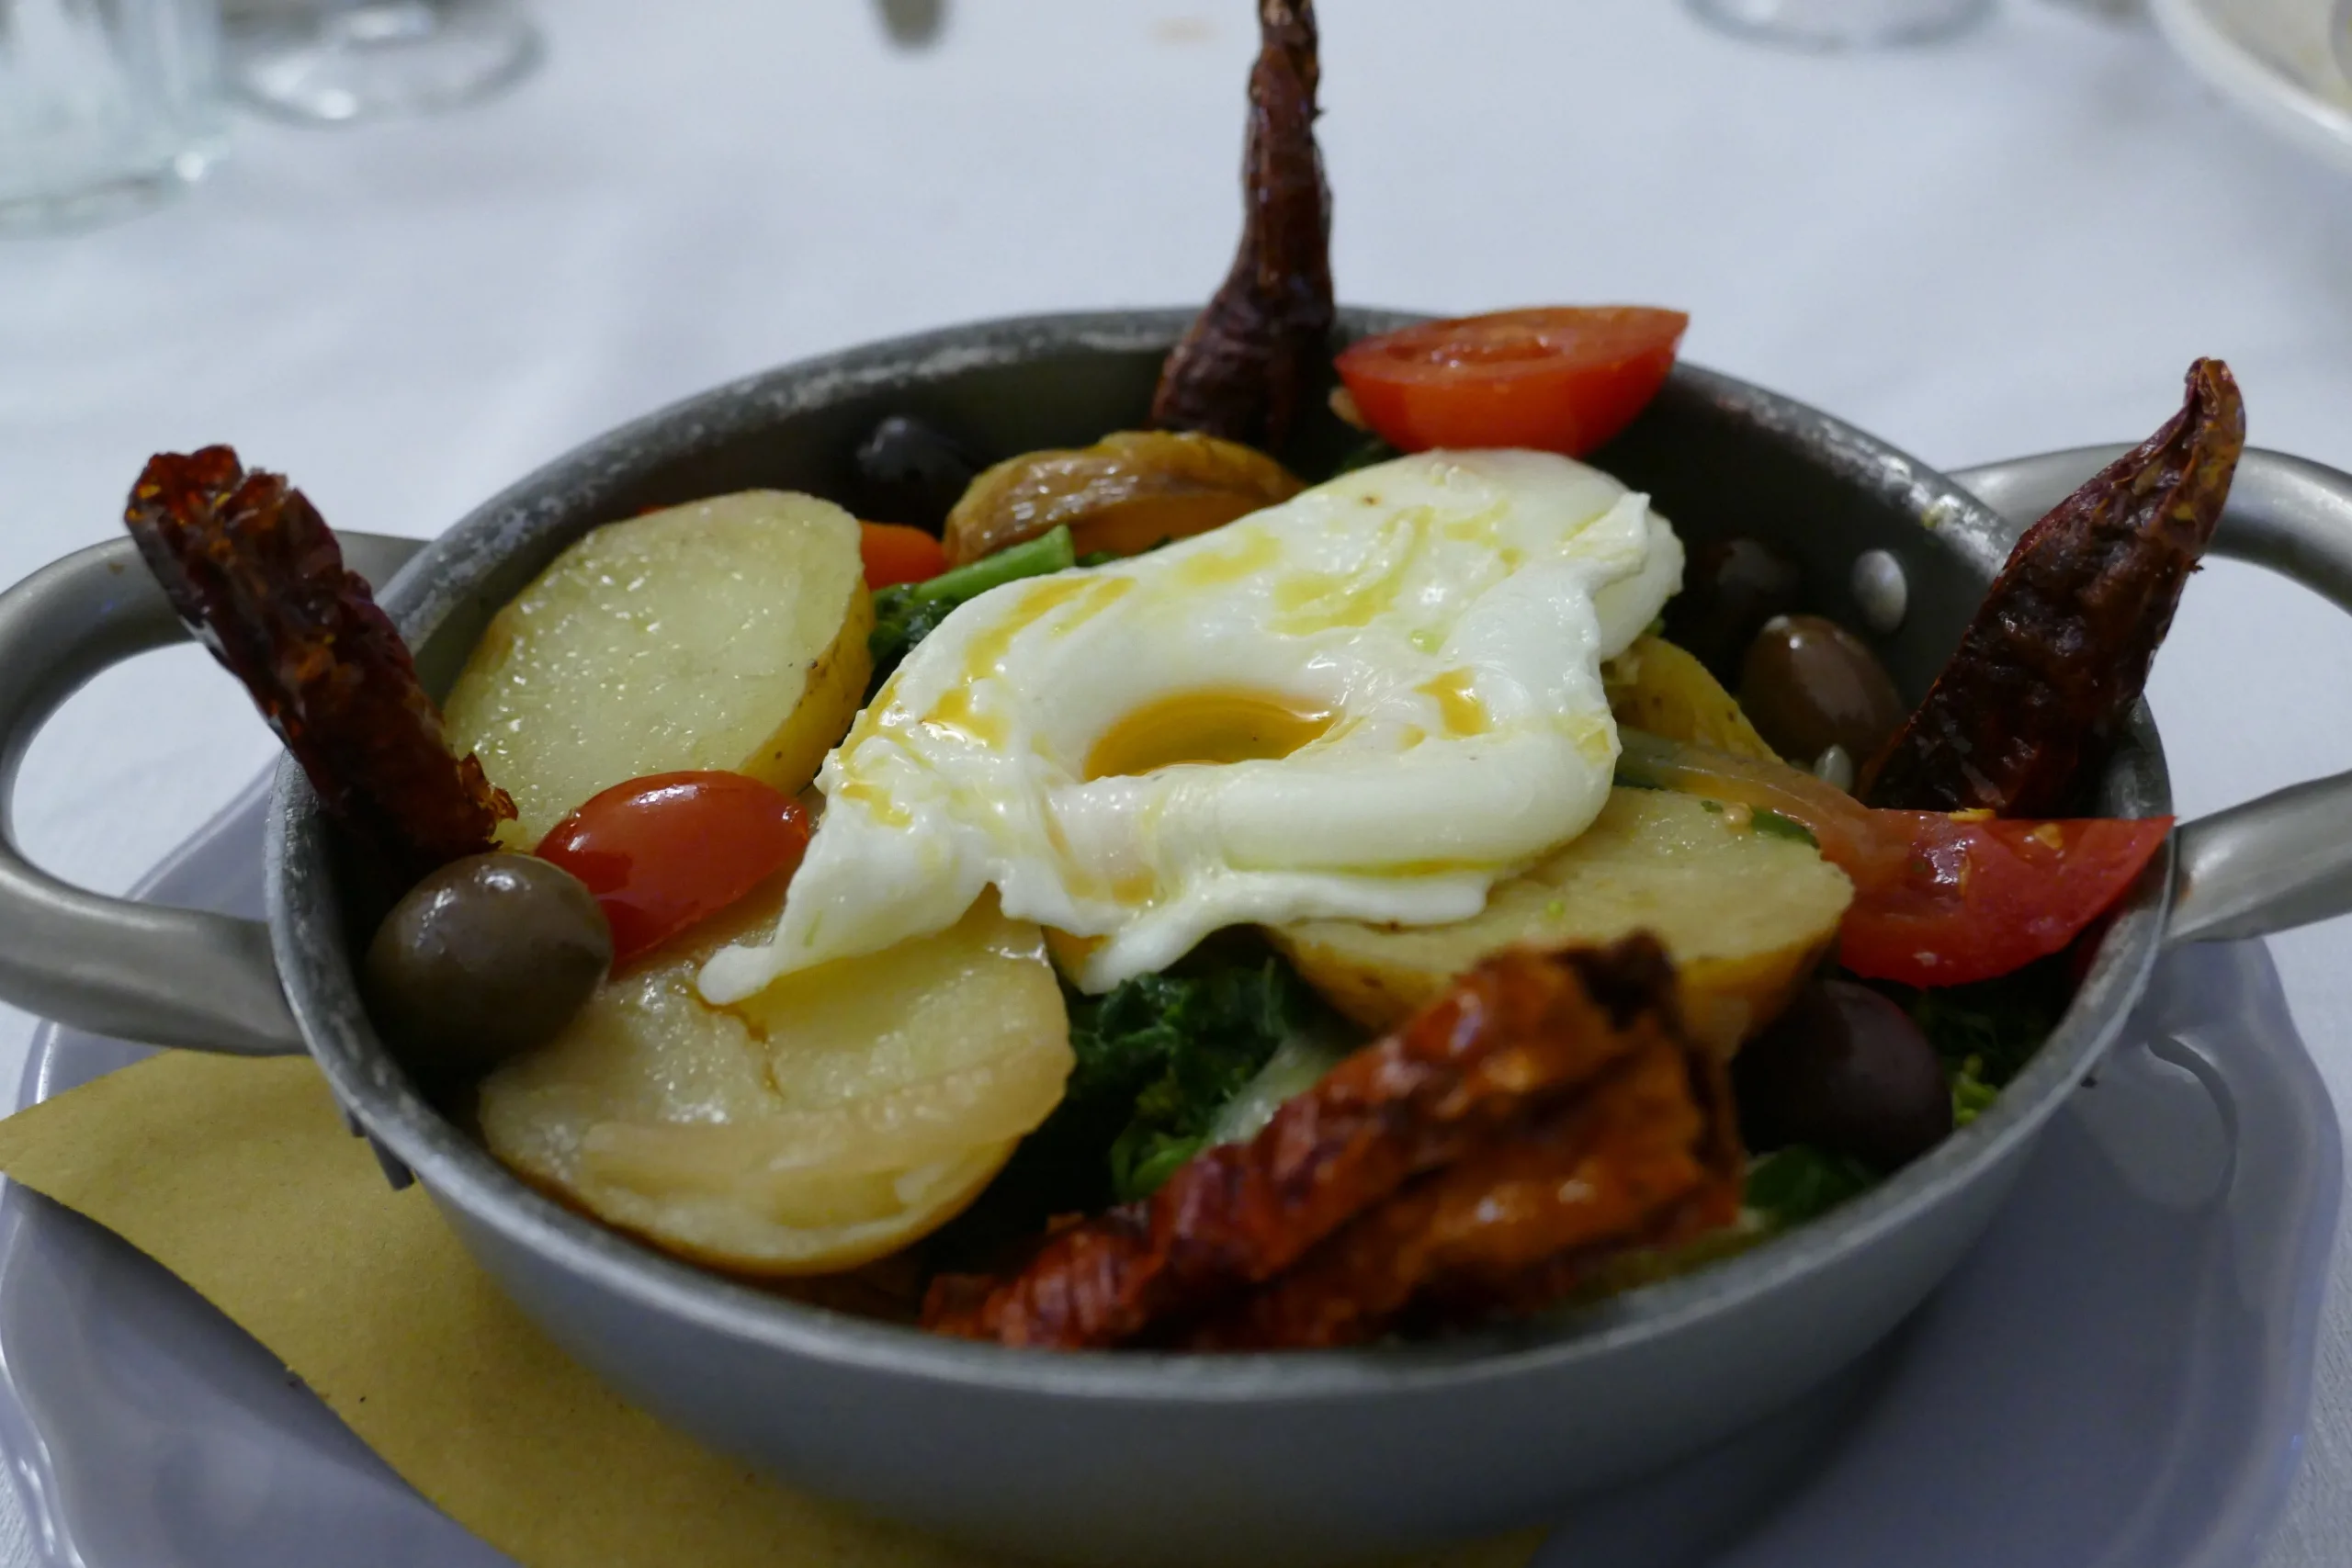 Cialledda With Matera Bread, Turnip Tops, Olives, Potatoes, Tomatoes, Egg